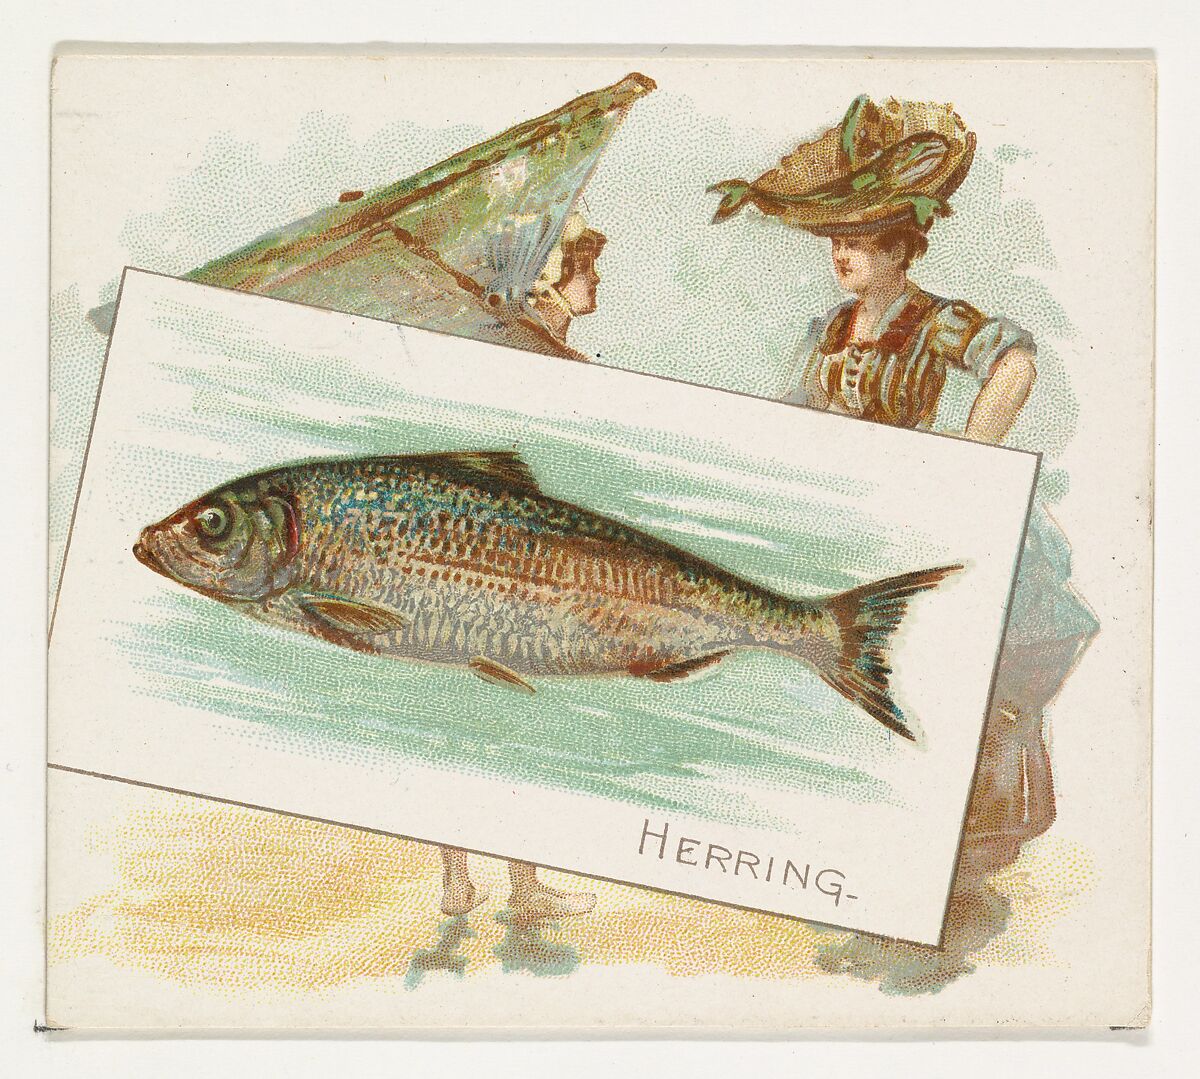 Herring, from Fish from American Waters series (N39) for Allen & Ginter Cigarettes, Issued by Allen &amp; Ginter (American, Richmond, Virginia), Commercial color lithograph 